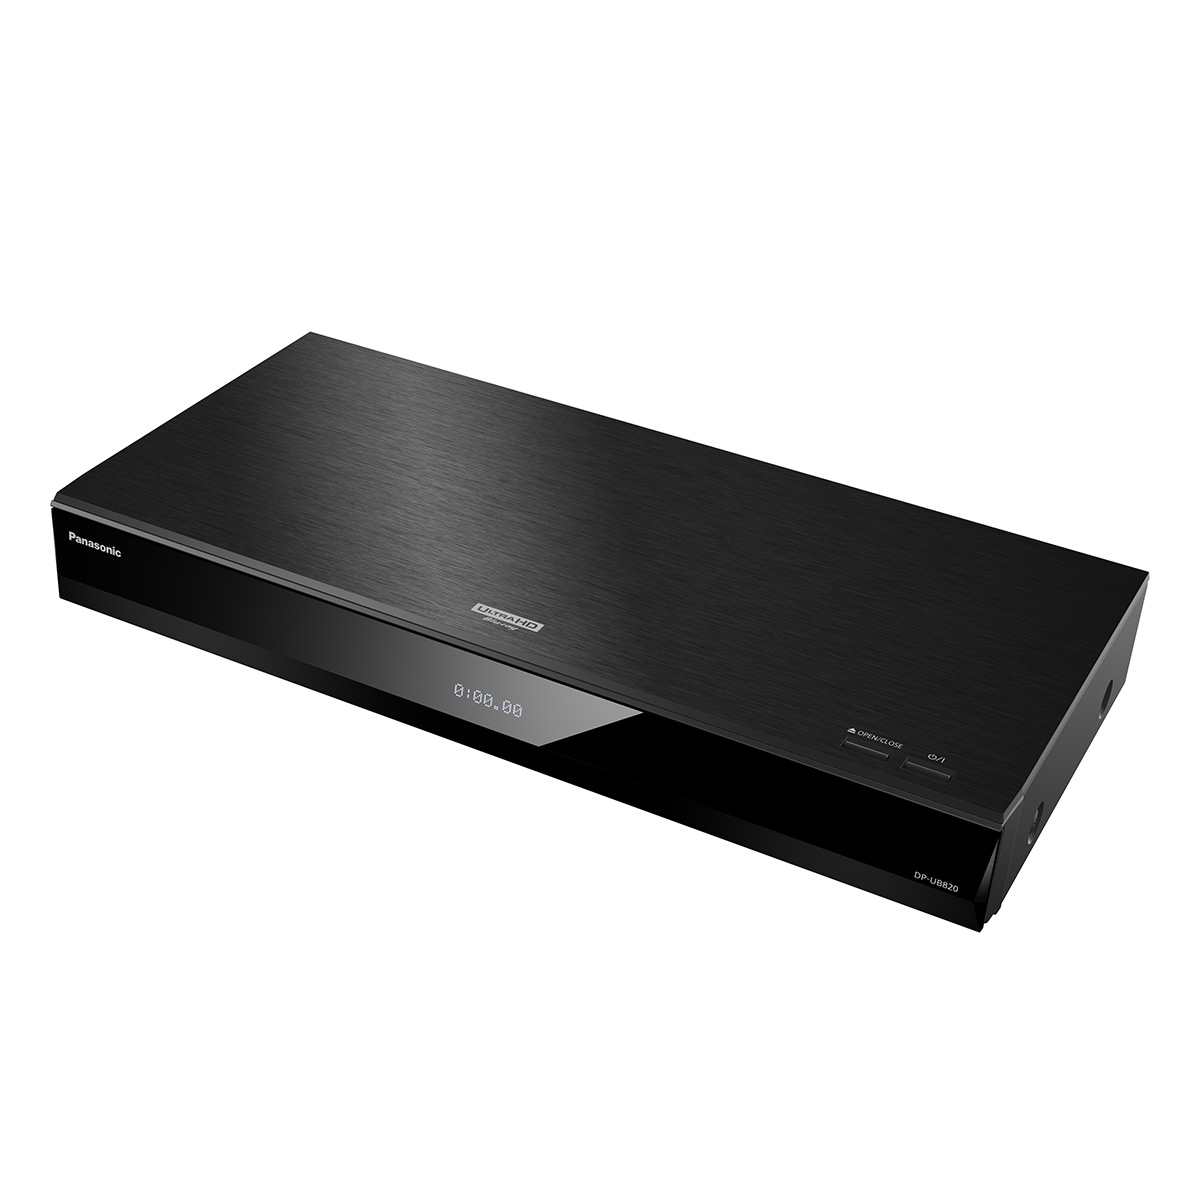 Panasonic DP-UB820-K 4K Ultra HD Blu-ray Player with HDR10+ and Dolby Vision Playback - image 2 of 4